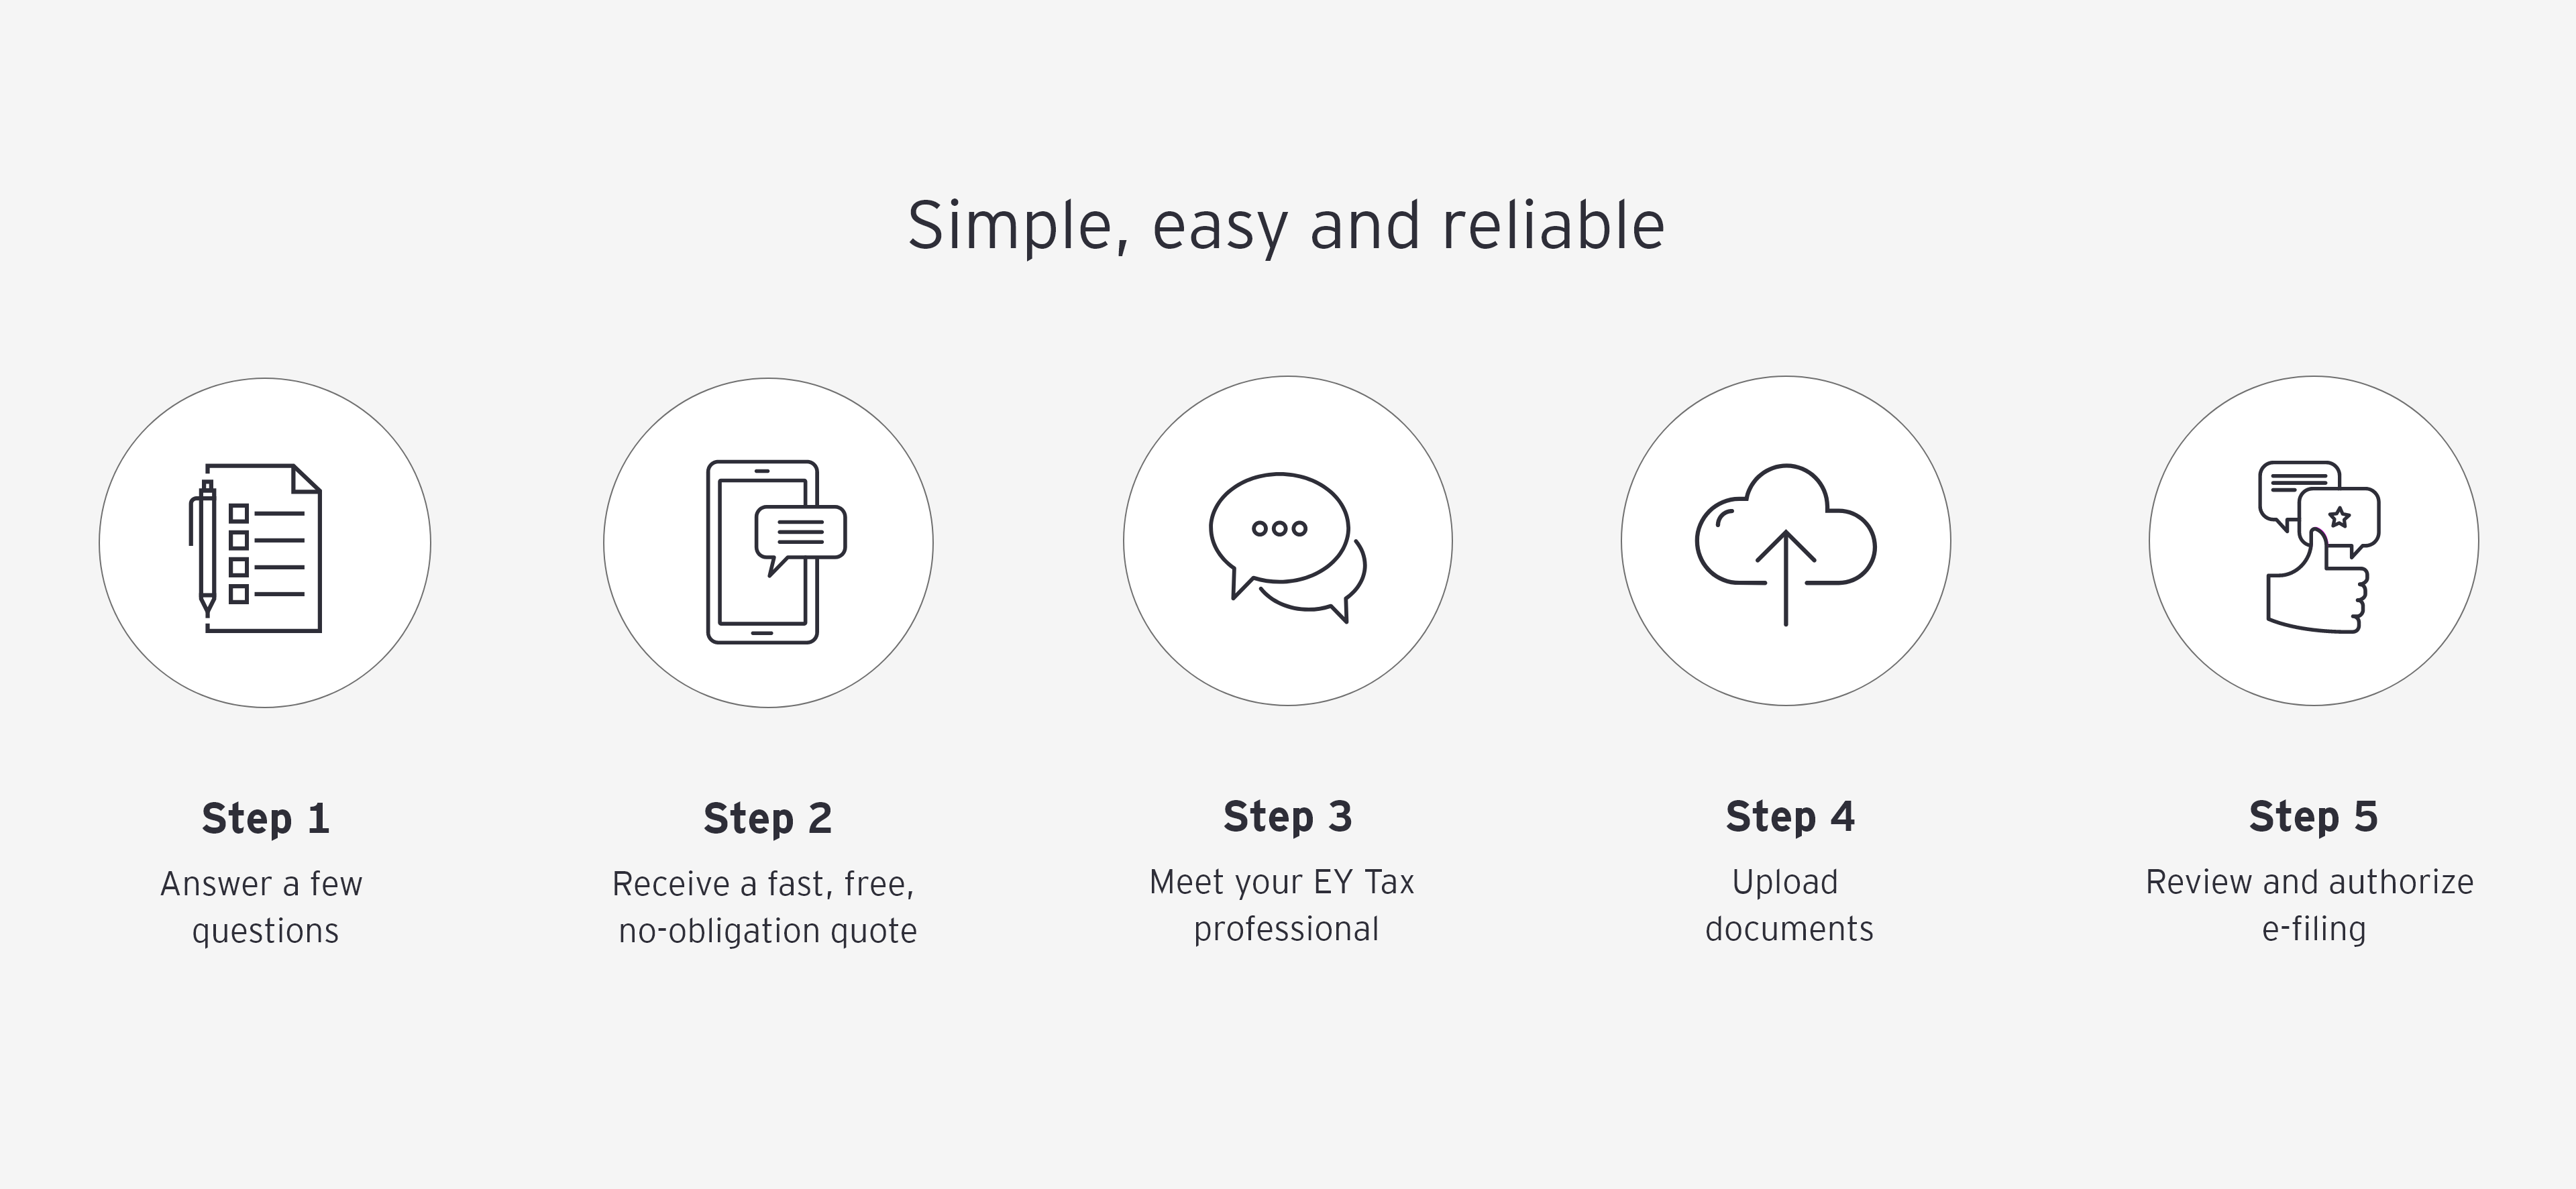 EY Taxchat - Simple, easy and reliable